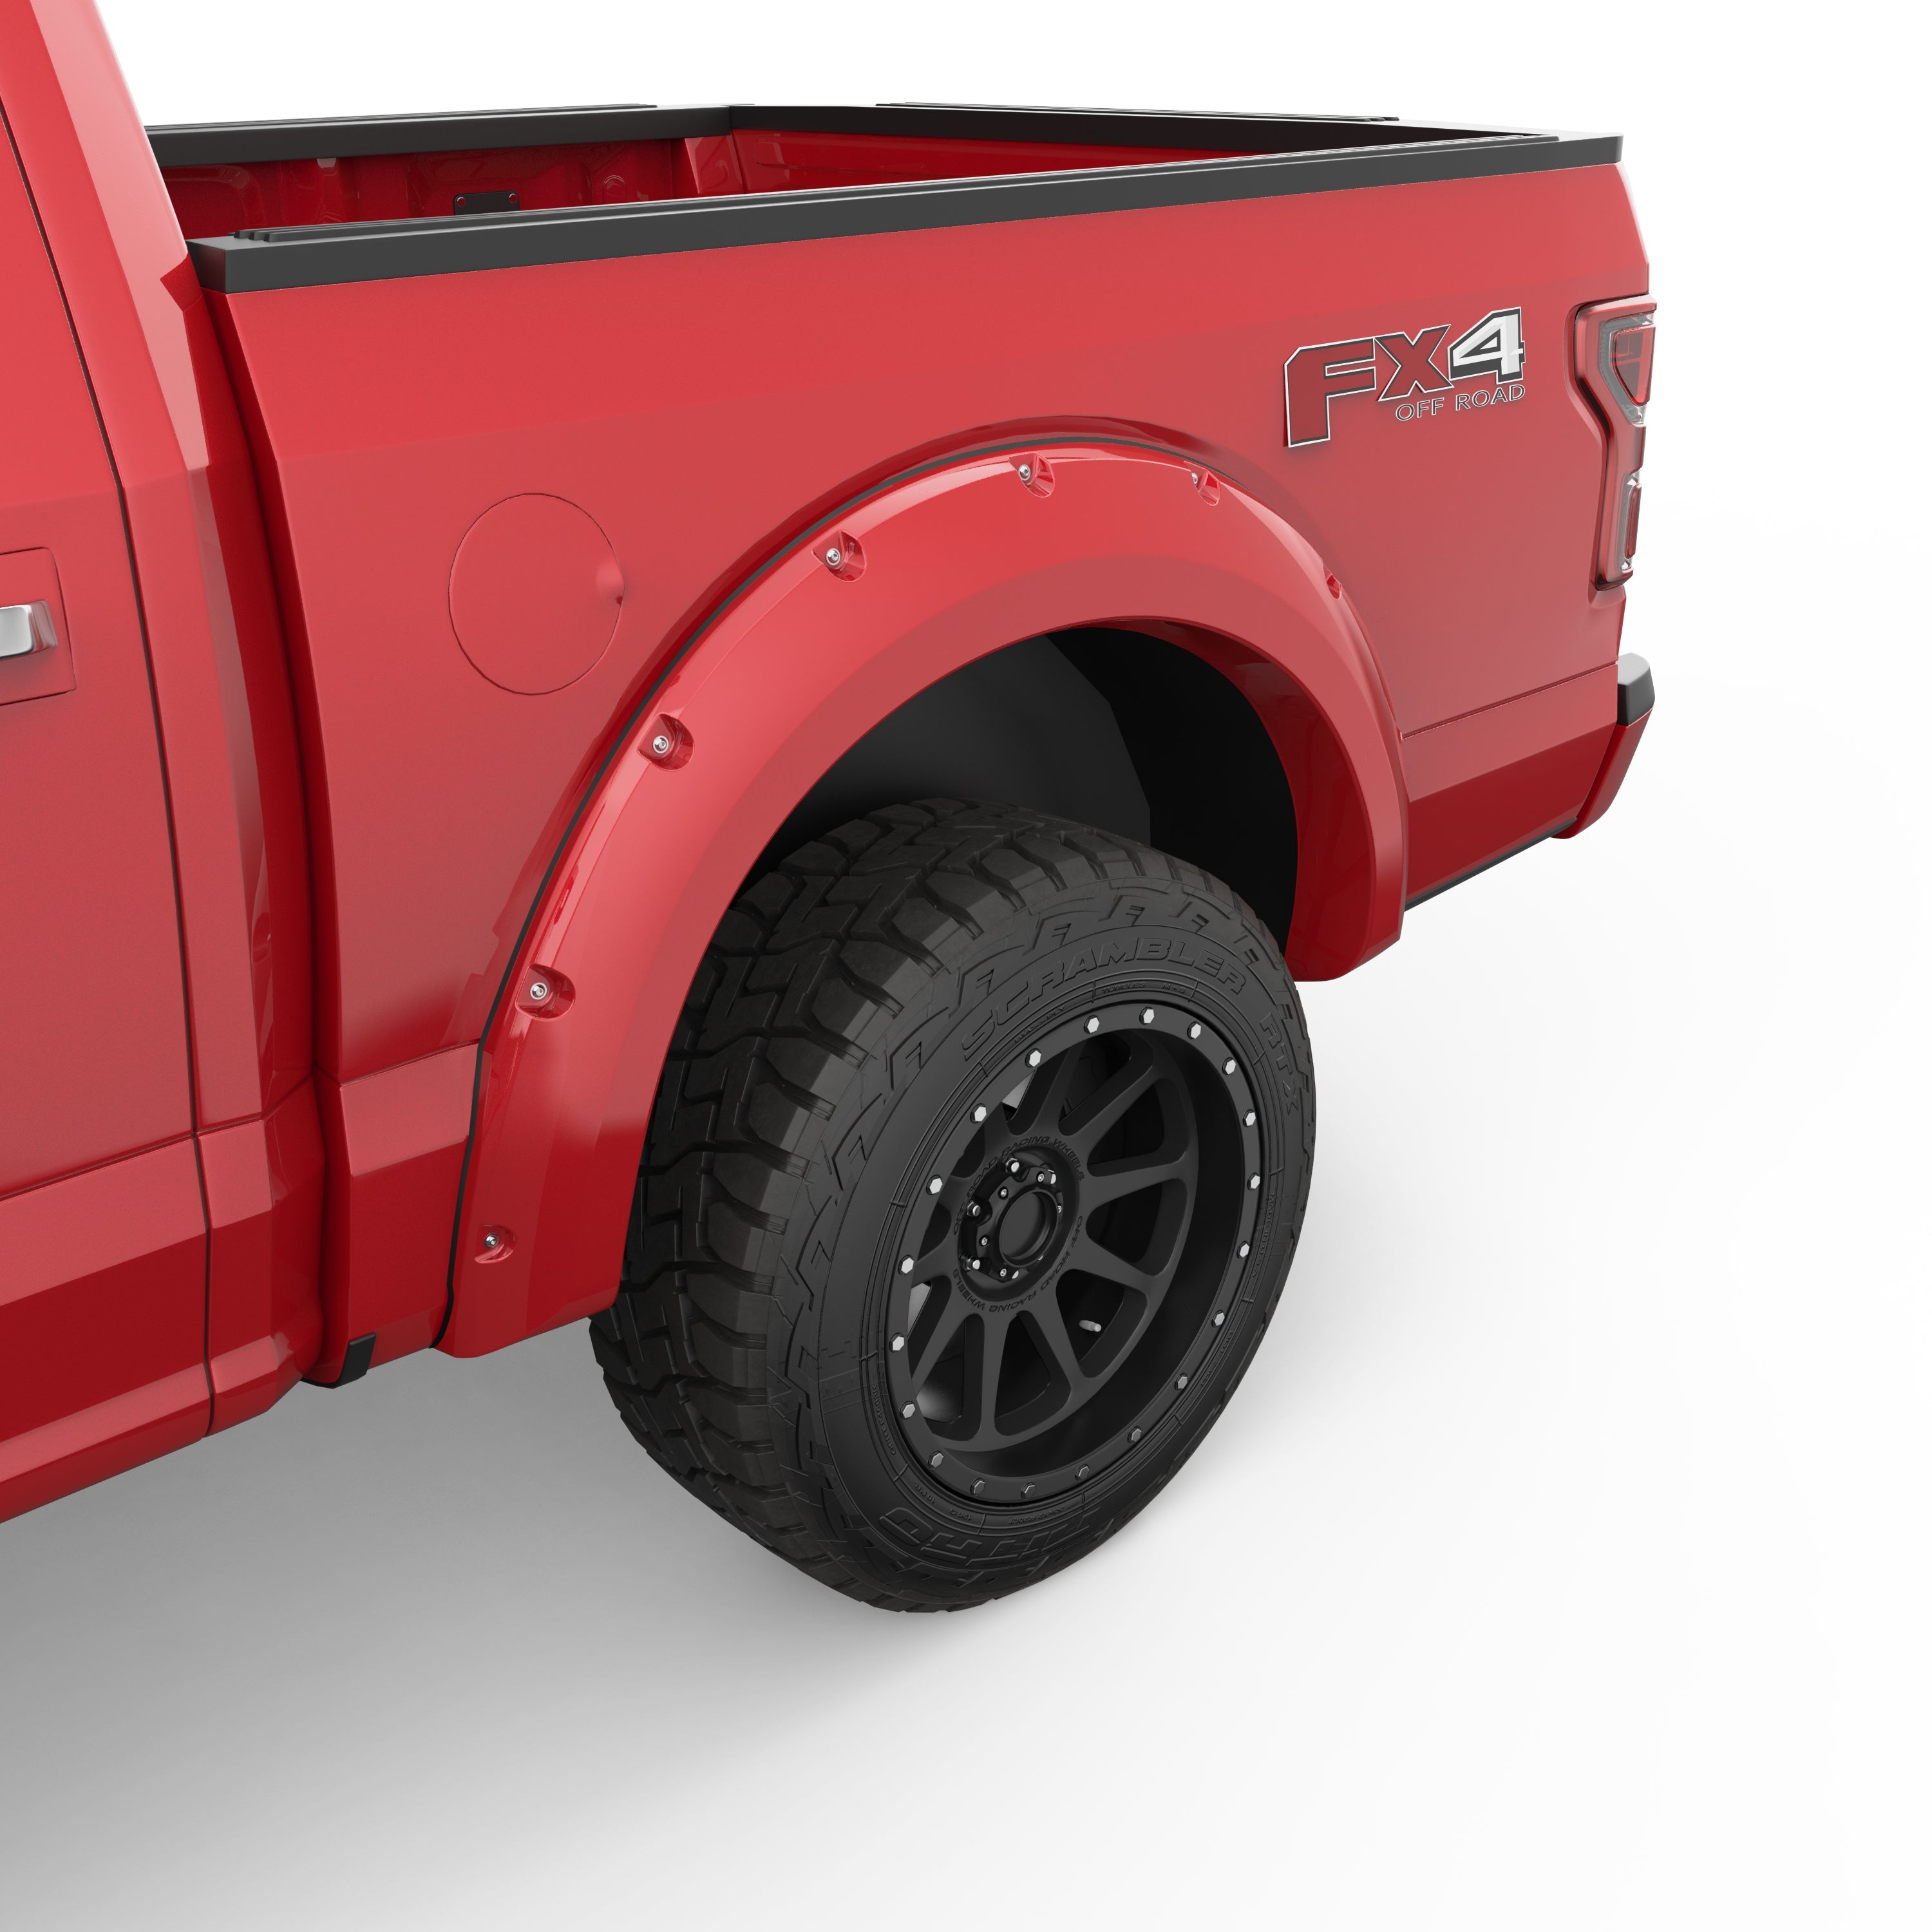 EGR 2018-2020 Ford F-150 Extended Crew Standard Cab Pickup 2Door 4Door Painted To Code Race Red Set Of 4 Non Raptor Traditional Bolt-On Look Fender Flares 793574-PQ